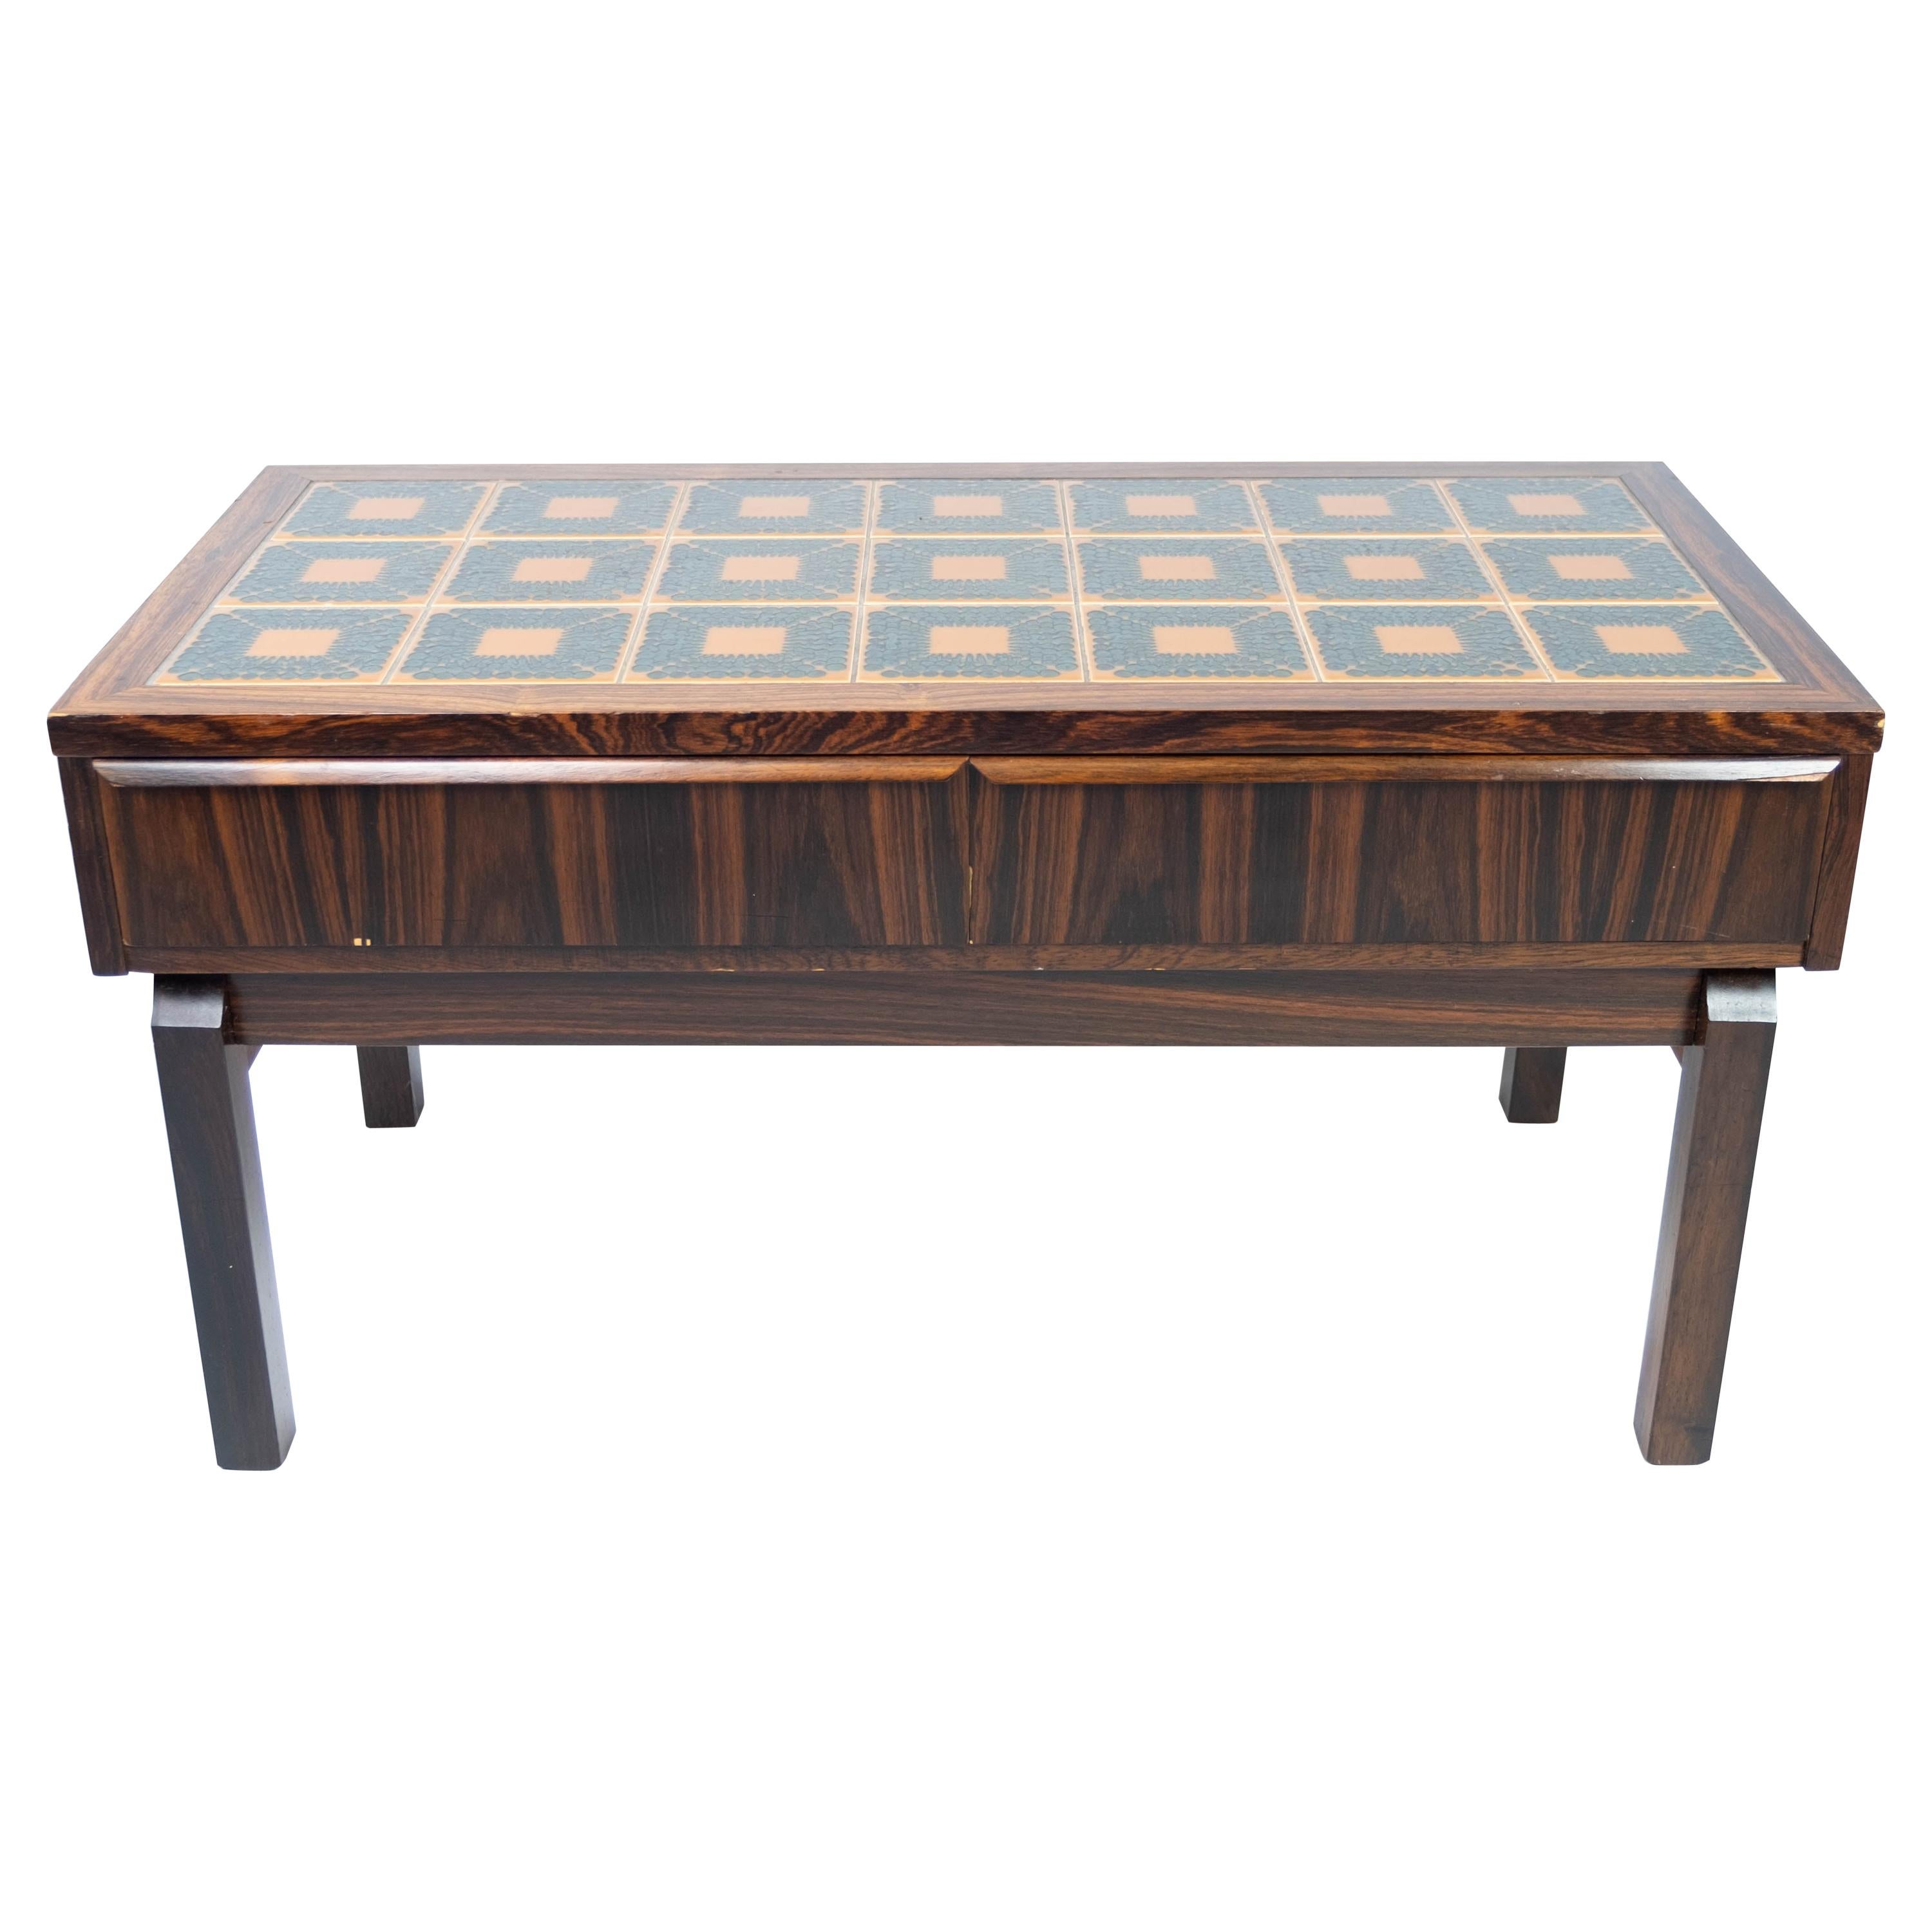 Low Chest in Rosewood and Tiles, of Danish Design from the 1960s